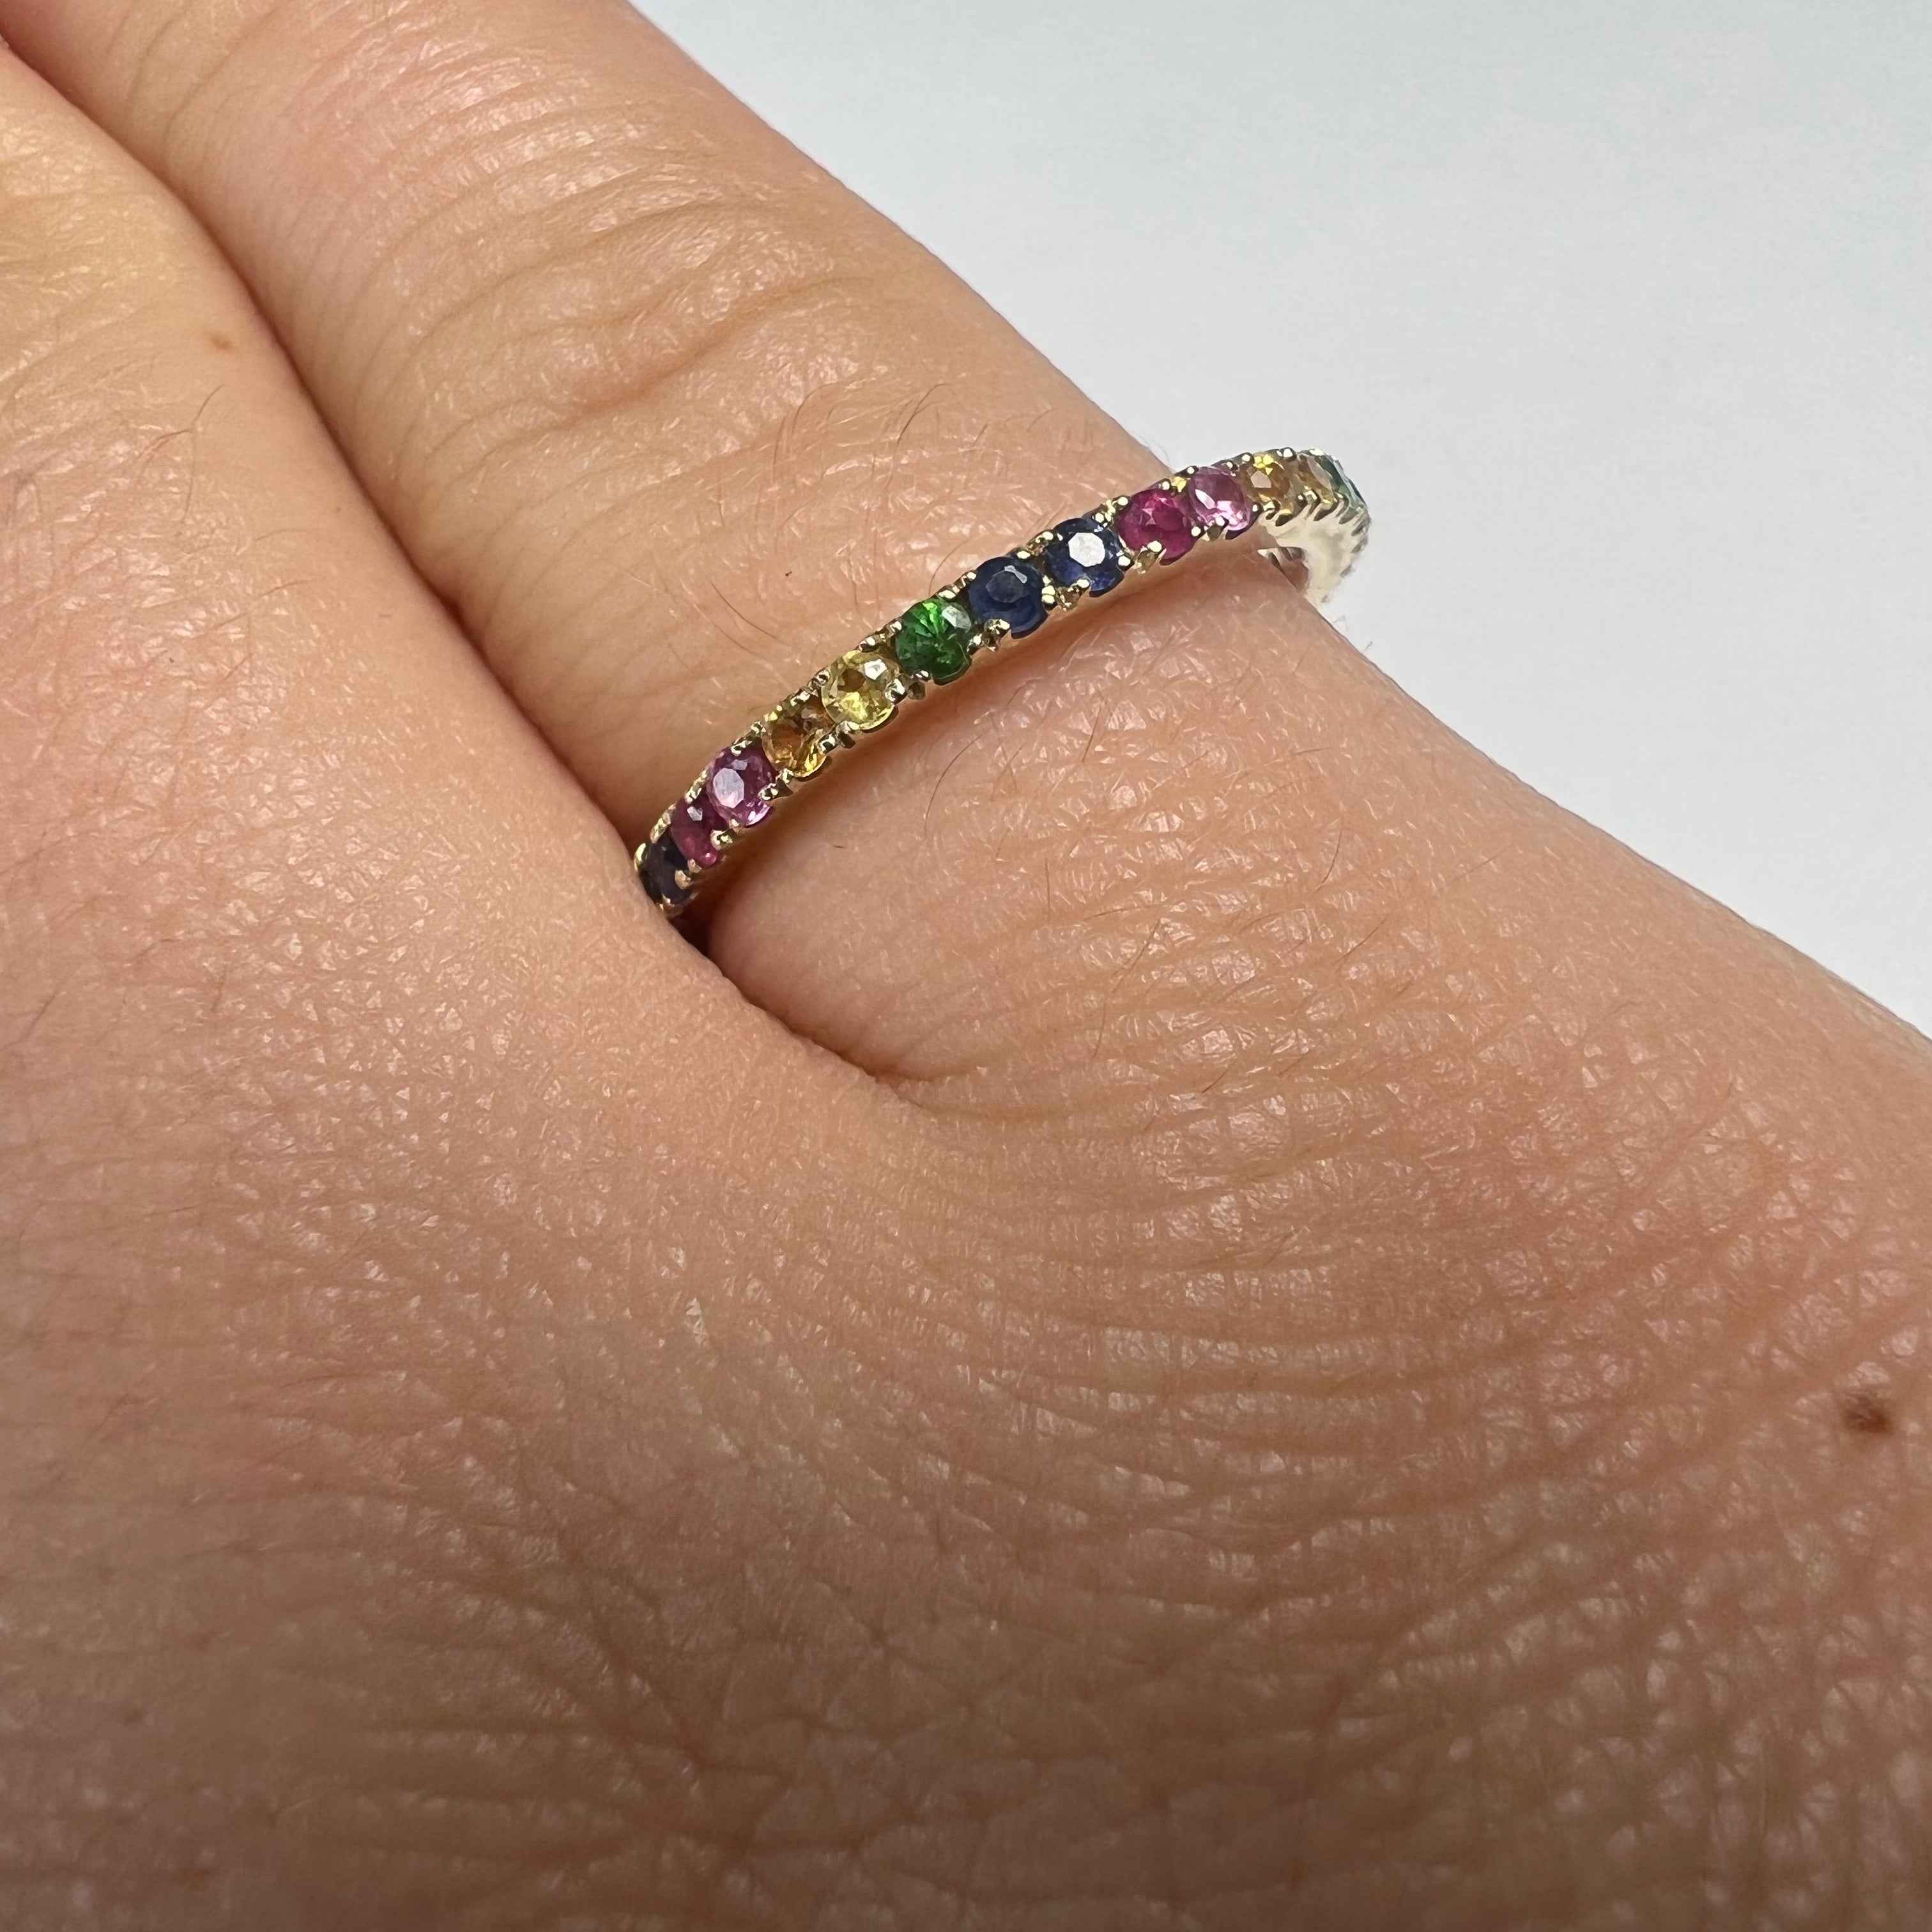 Solid 14K Yellow Gold Natural Rainbow Sapphire Eternity Ring Band Size 6.5